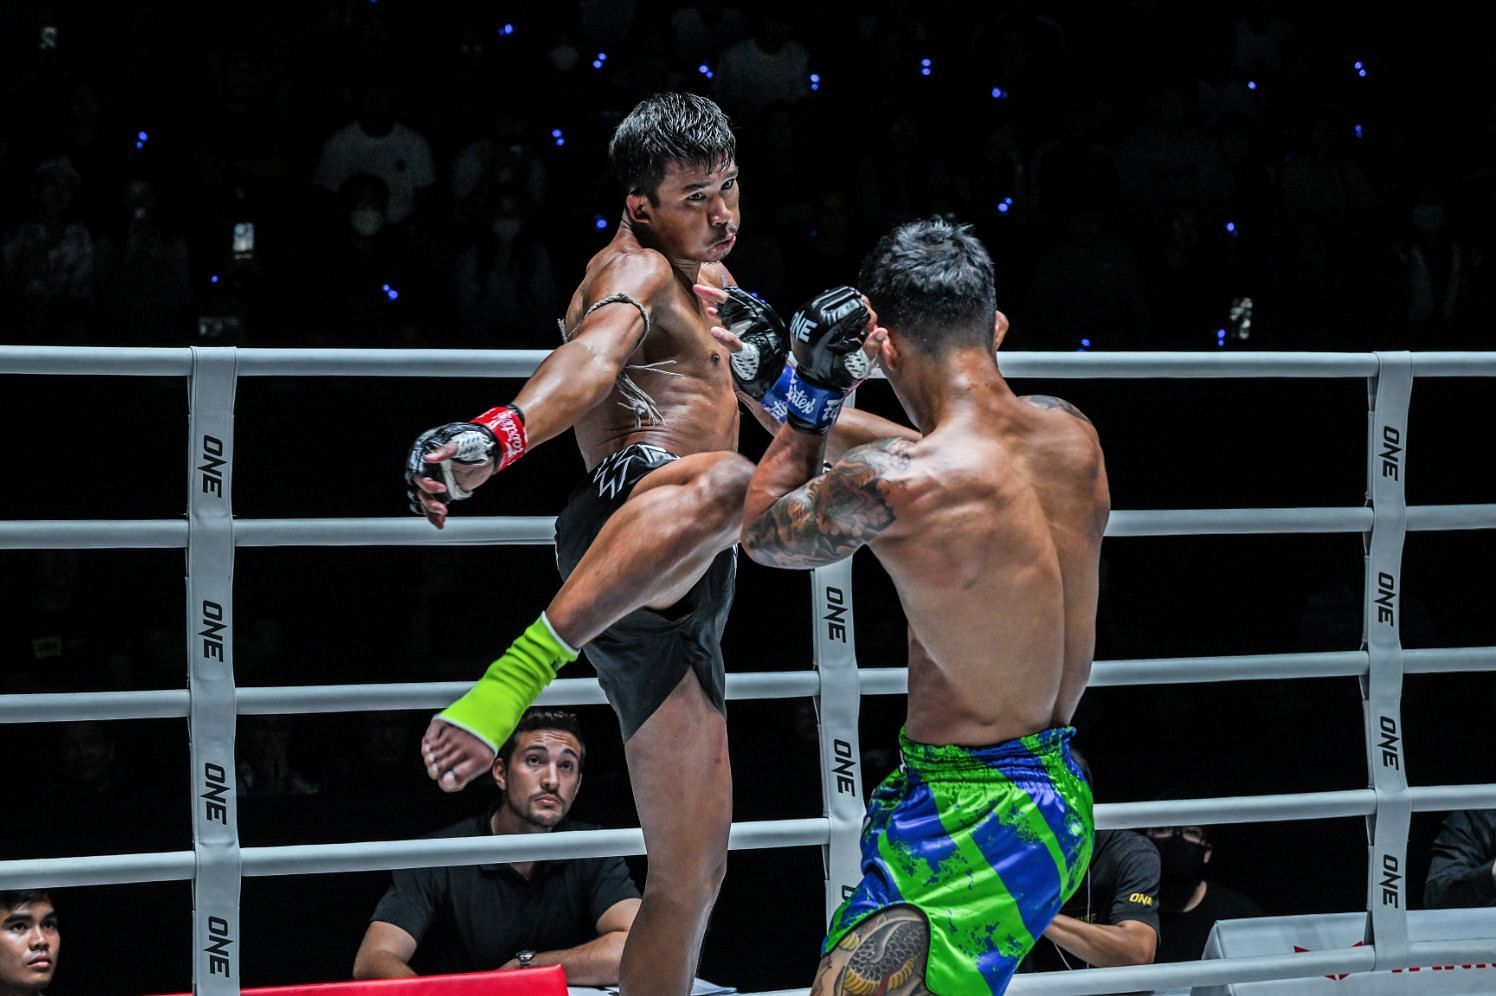 Superlek (L) unleashes his brutal kicks at Kongthoranee | Photo by ONE Championship